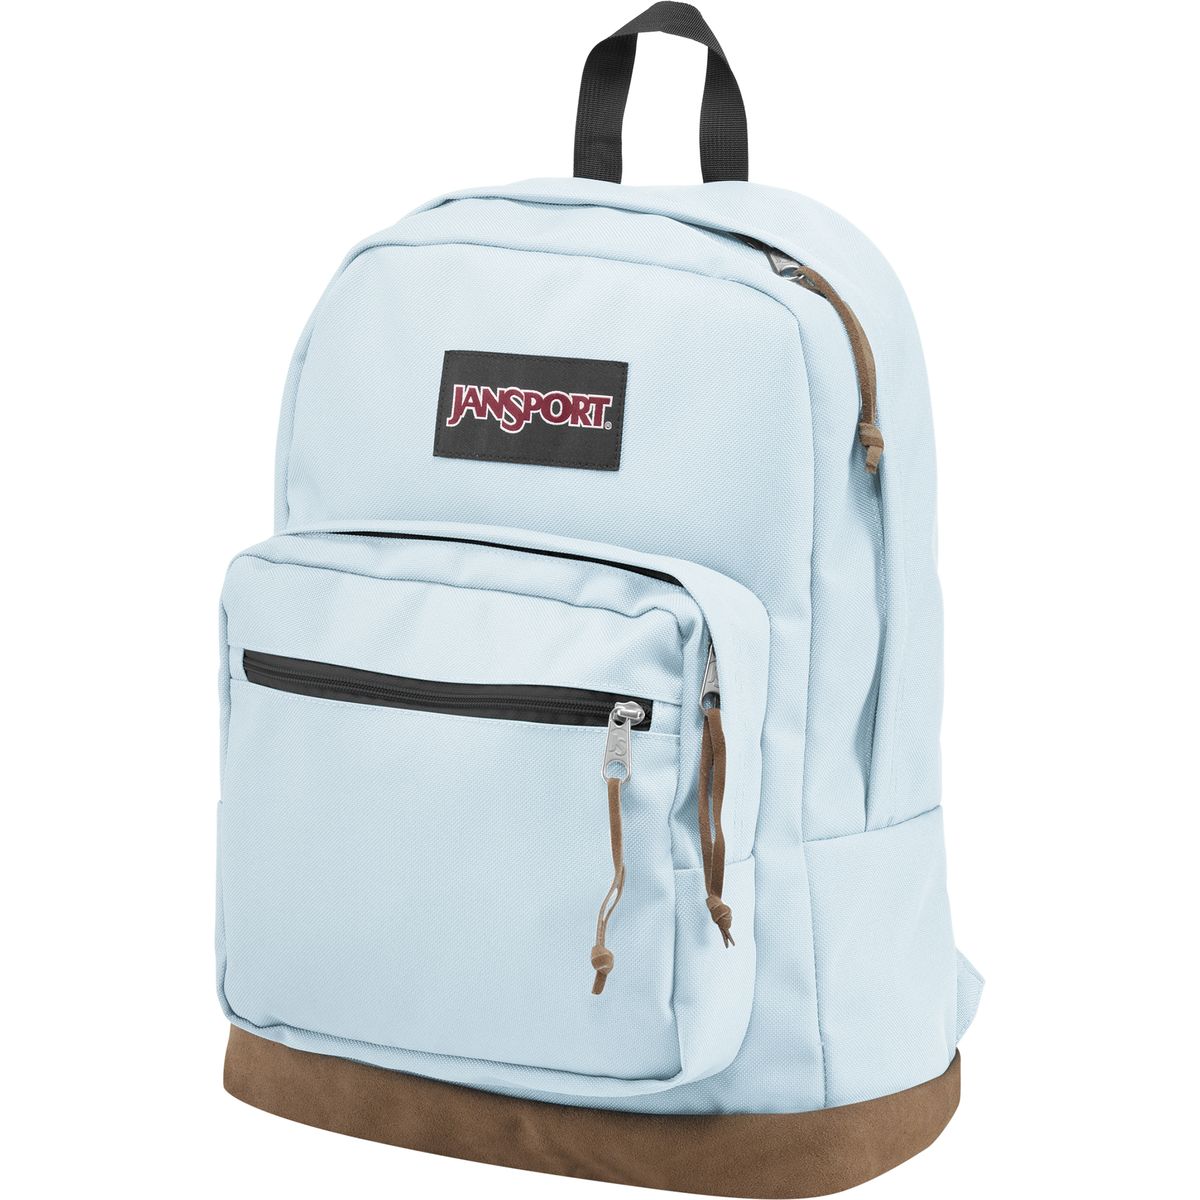 Jansport Right Pack 31l Backpack Grey Rabbit One Size